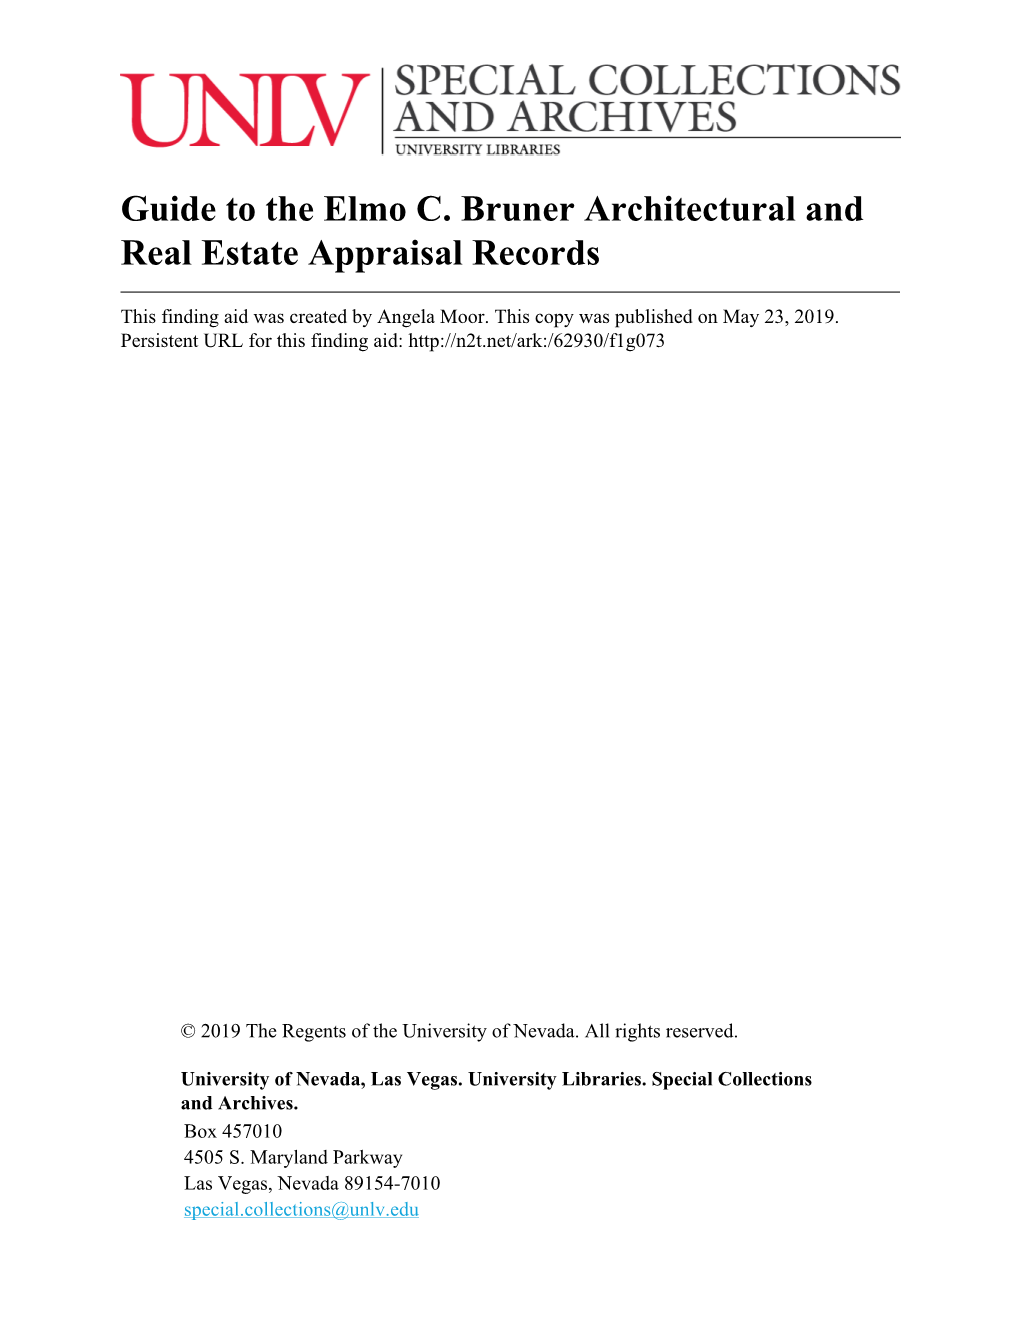 Guide to the Elmo C. Bruner Architectural and Real Estate Appraisal Records